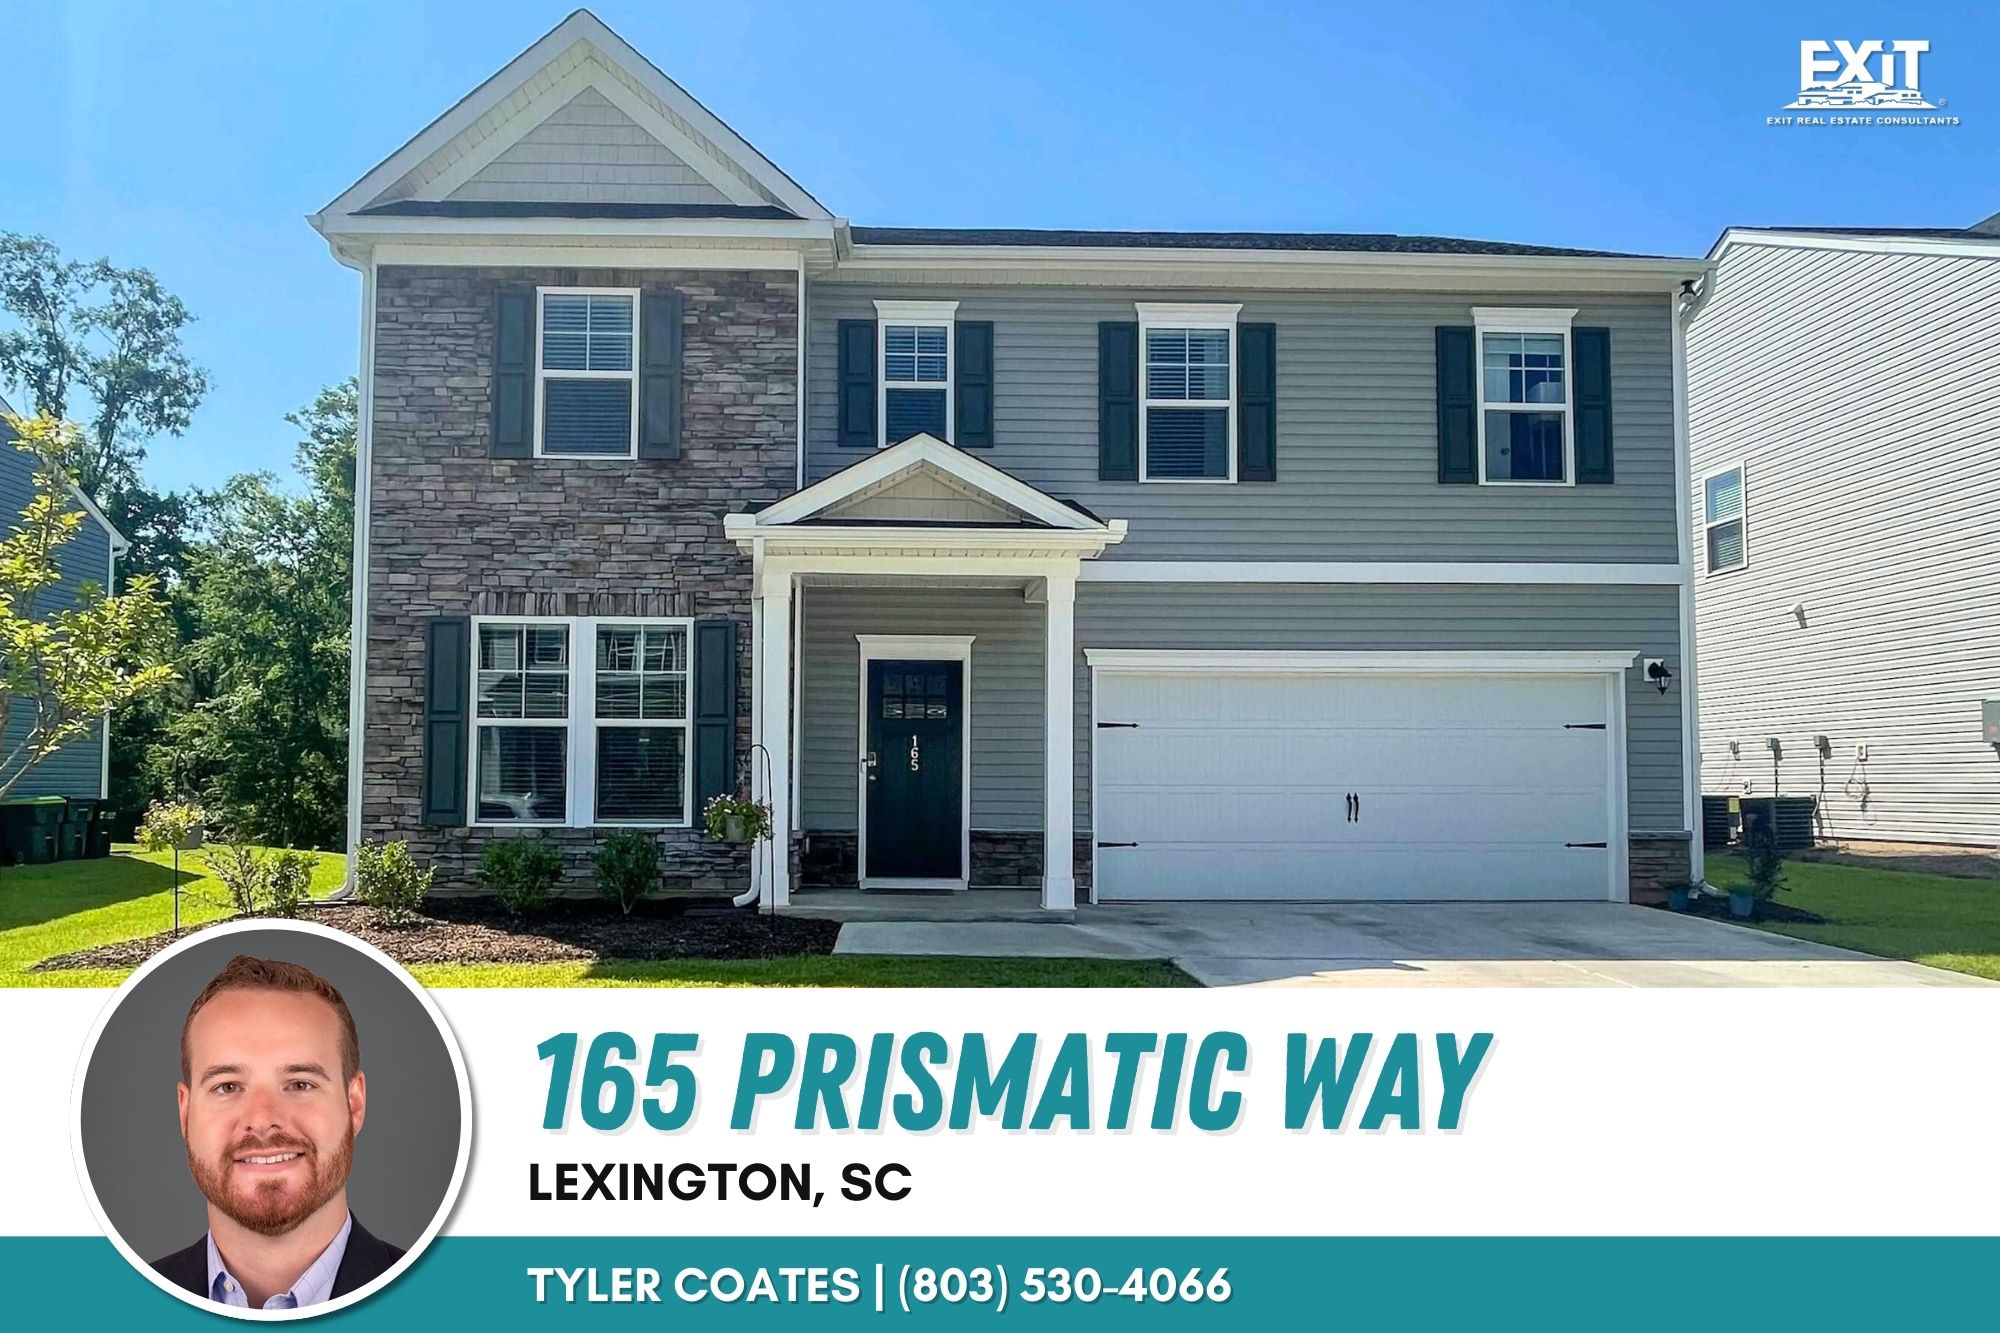 Just listed in Rocky Springs - Lexington